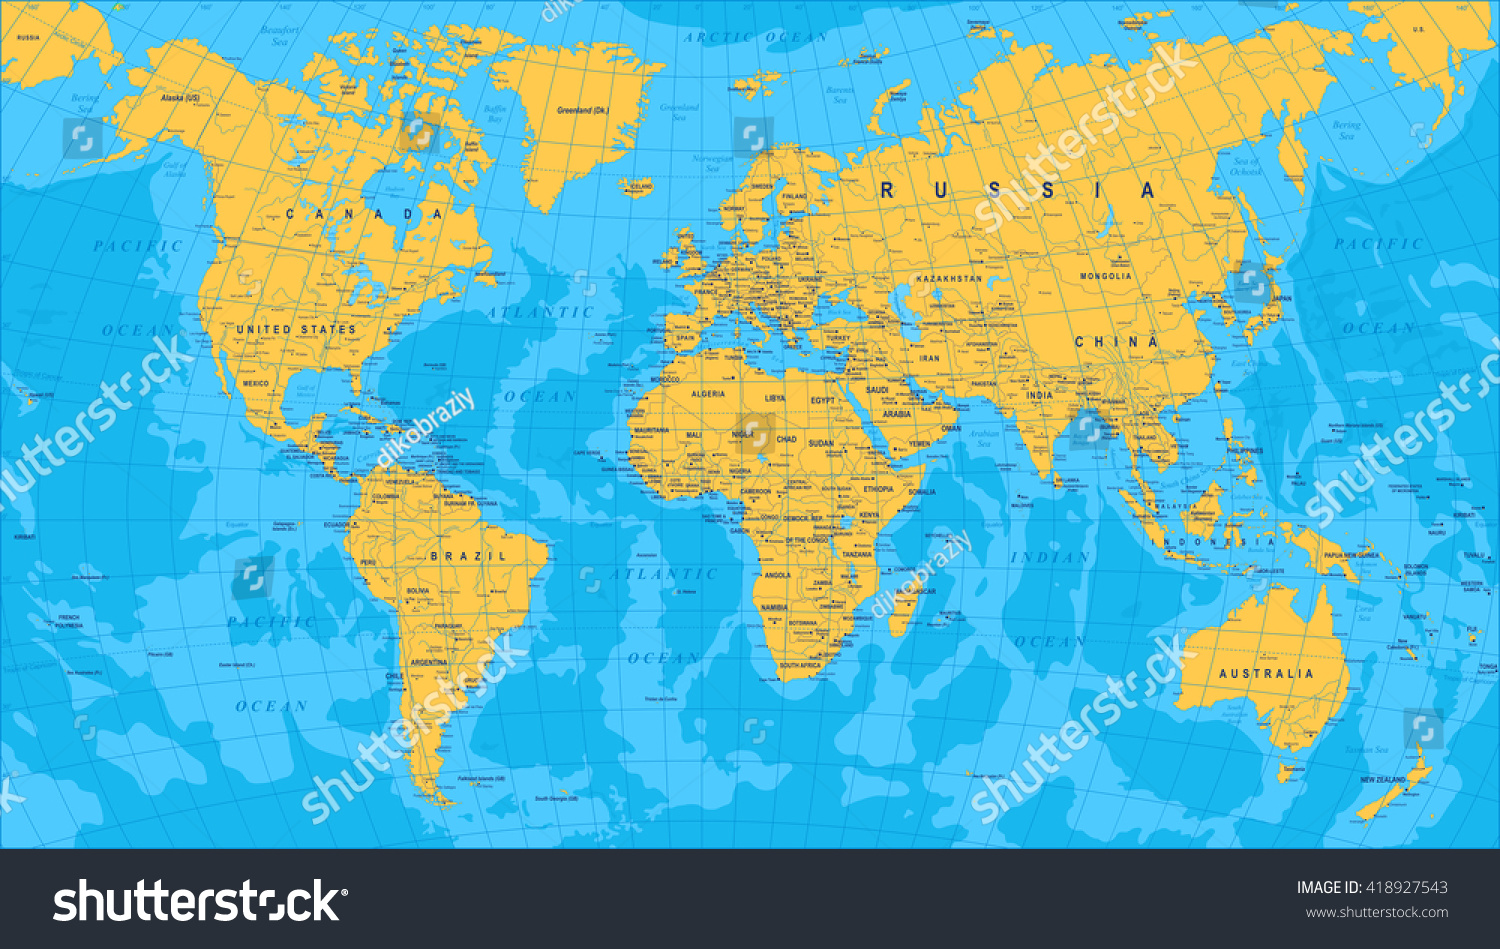 Colored World Map Borders Countries And Cities Illustration Stock Images